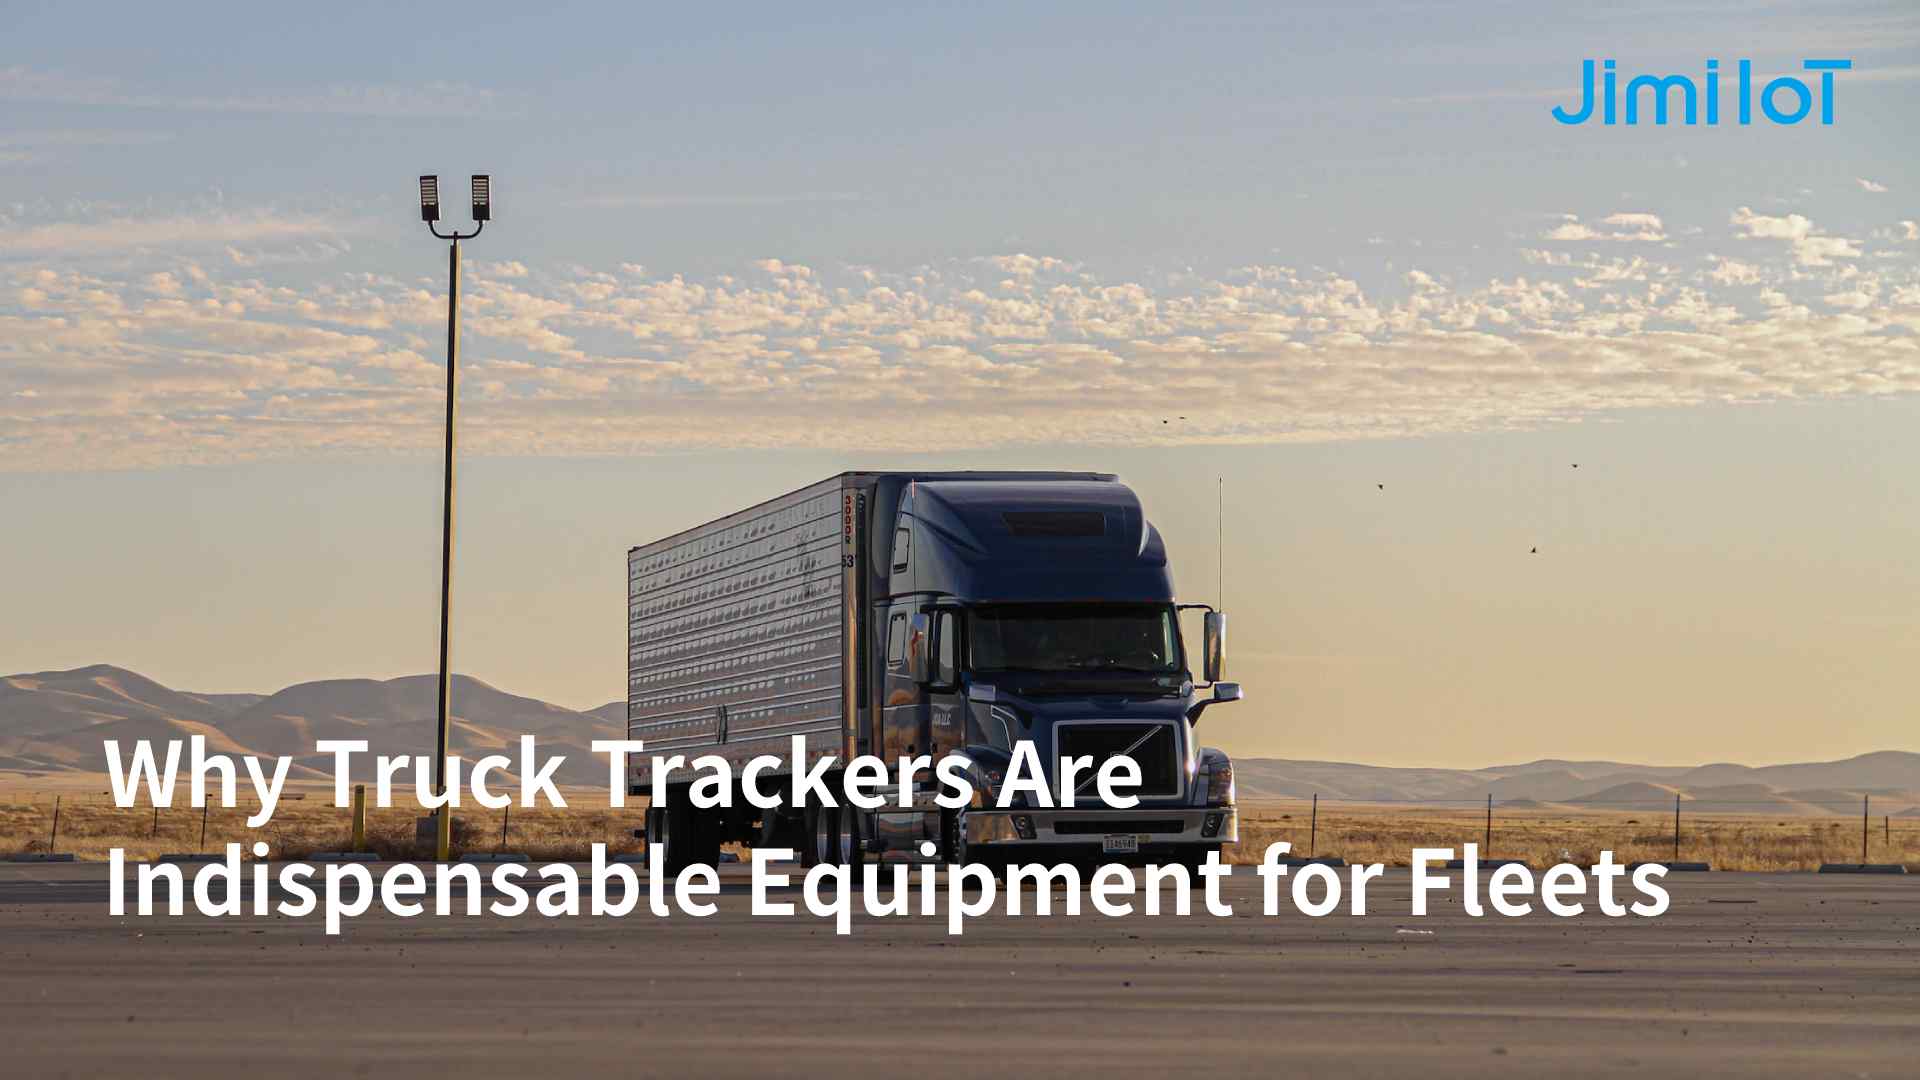 Why Truck Trackers Are Indispensable Equipment for Fleets